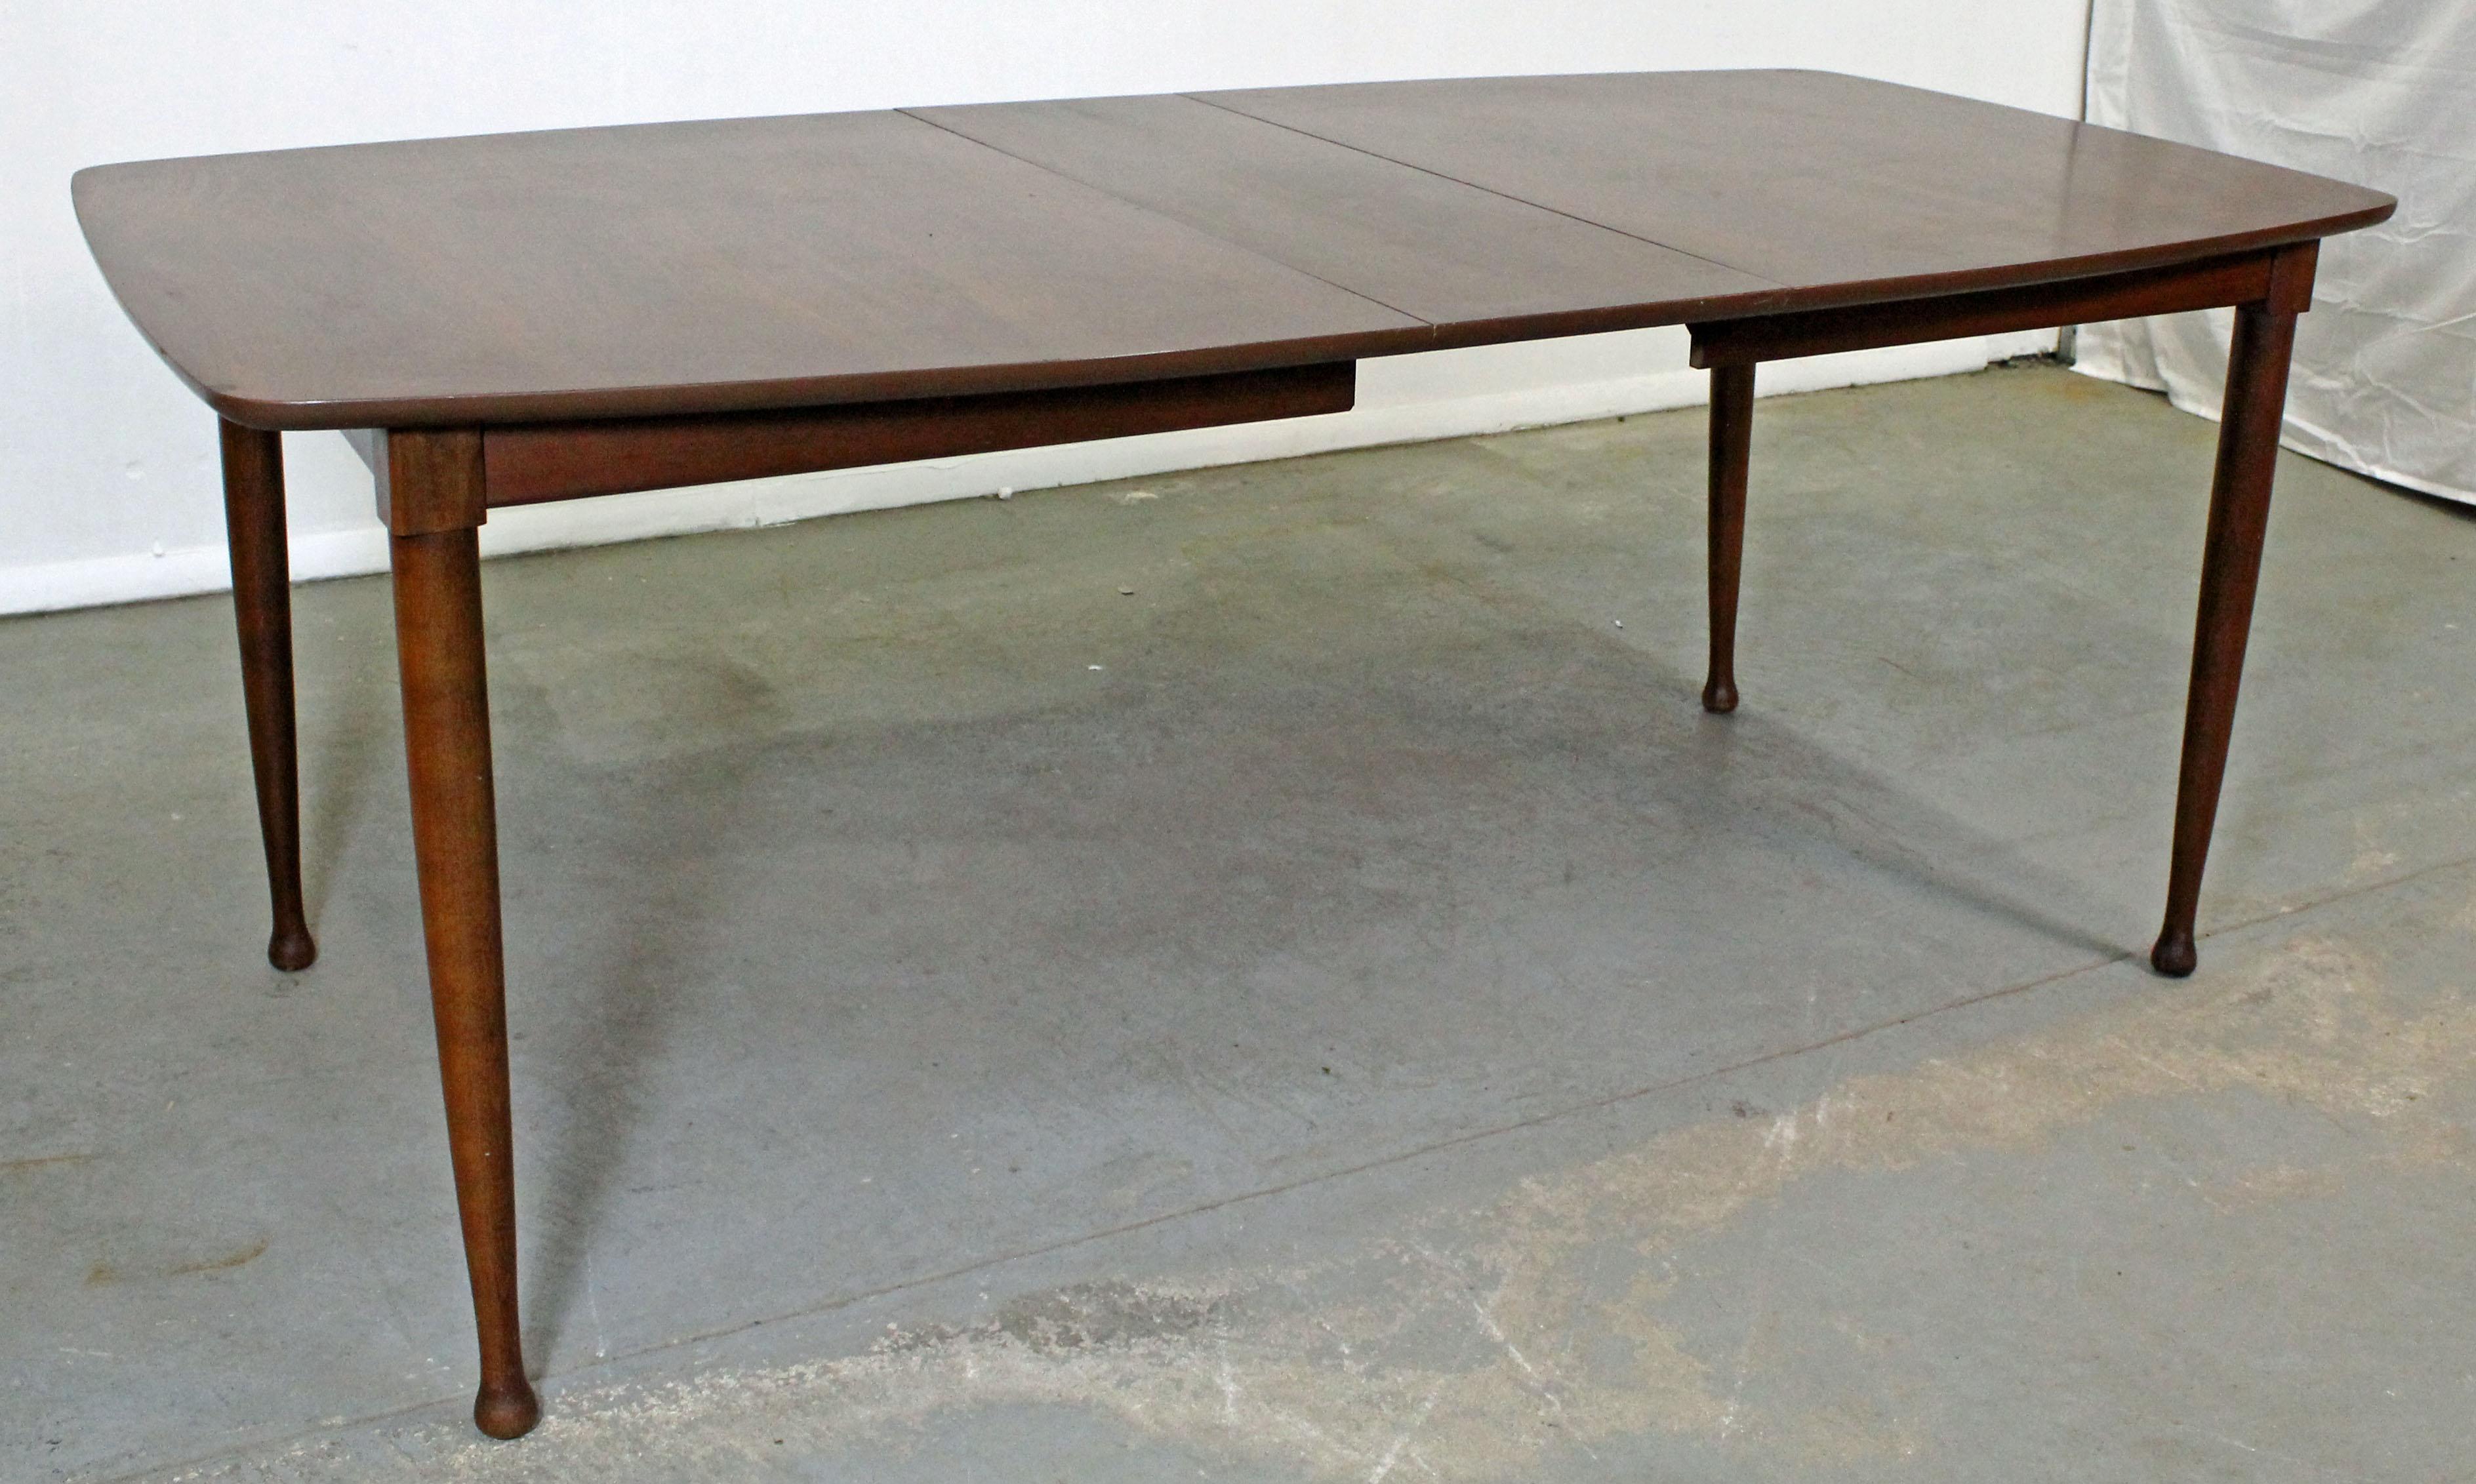 Offered is a Mid-Century Modern walnut dining table with a surfboard-top. Includes one extension board. It is in very good condition, showing minor surface/age wear. It is not signed.

Dimensions: 
62